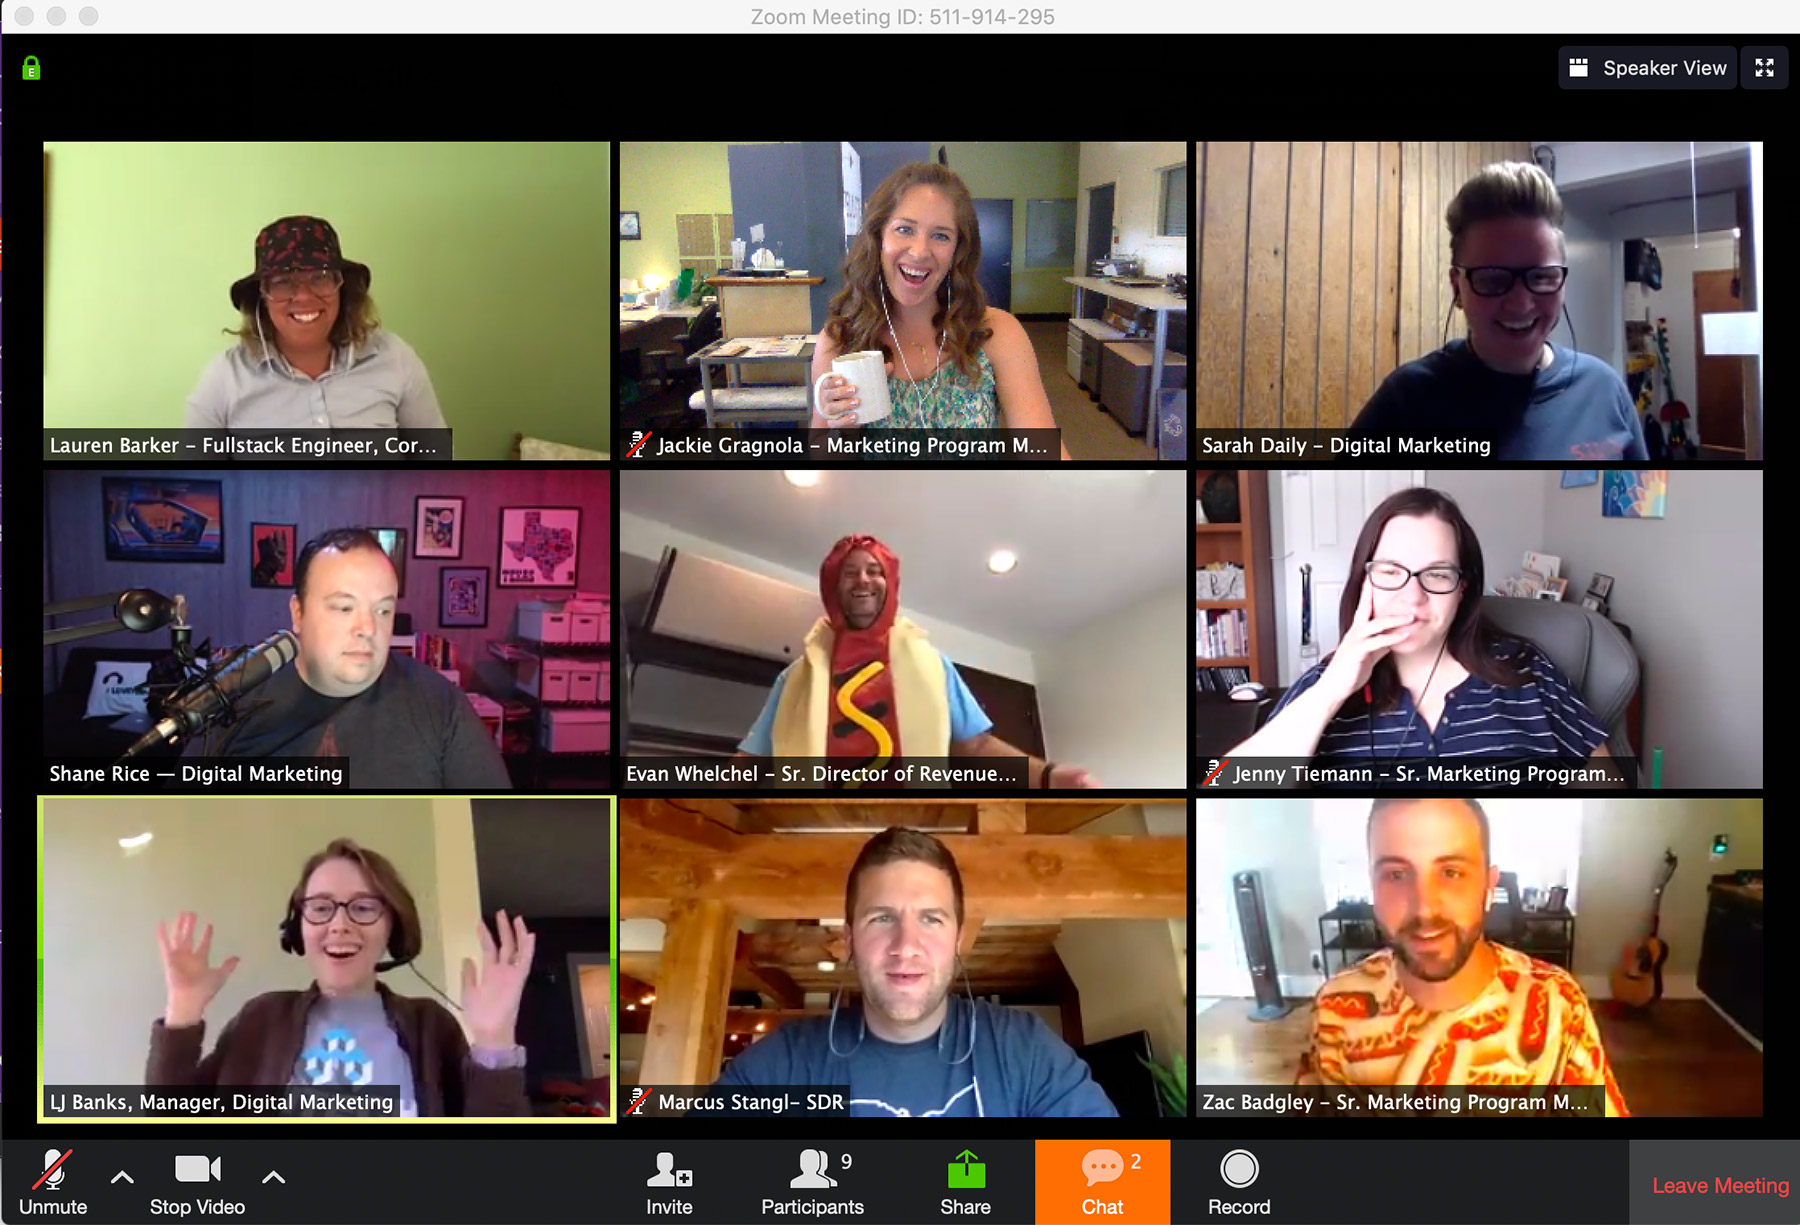 Group social calls are a great way for remote teams to connect and bond